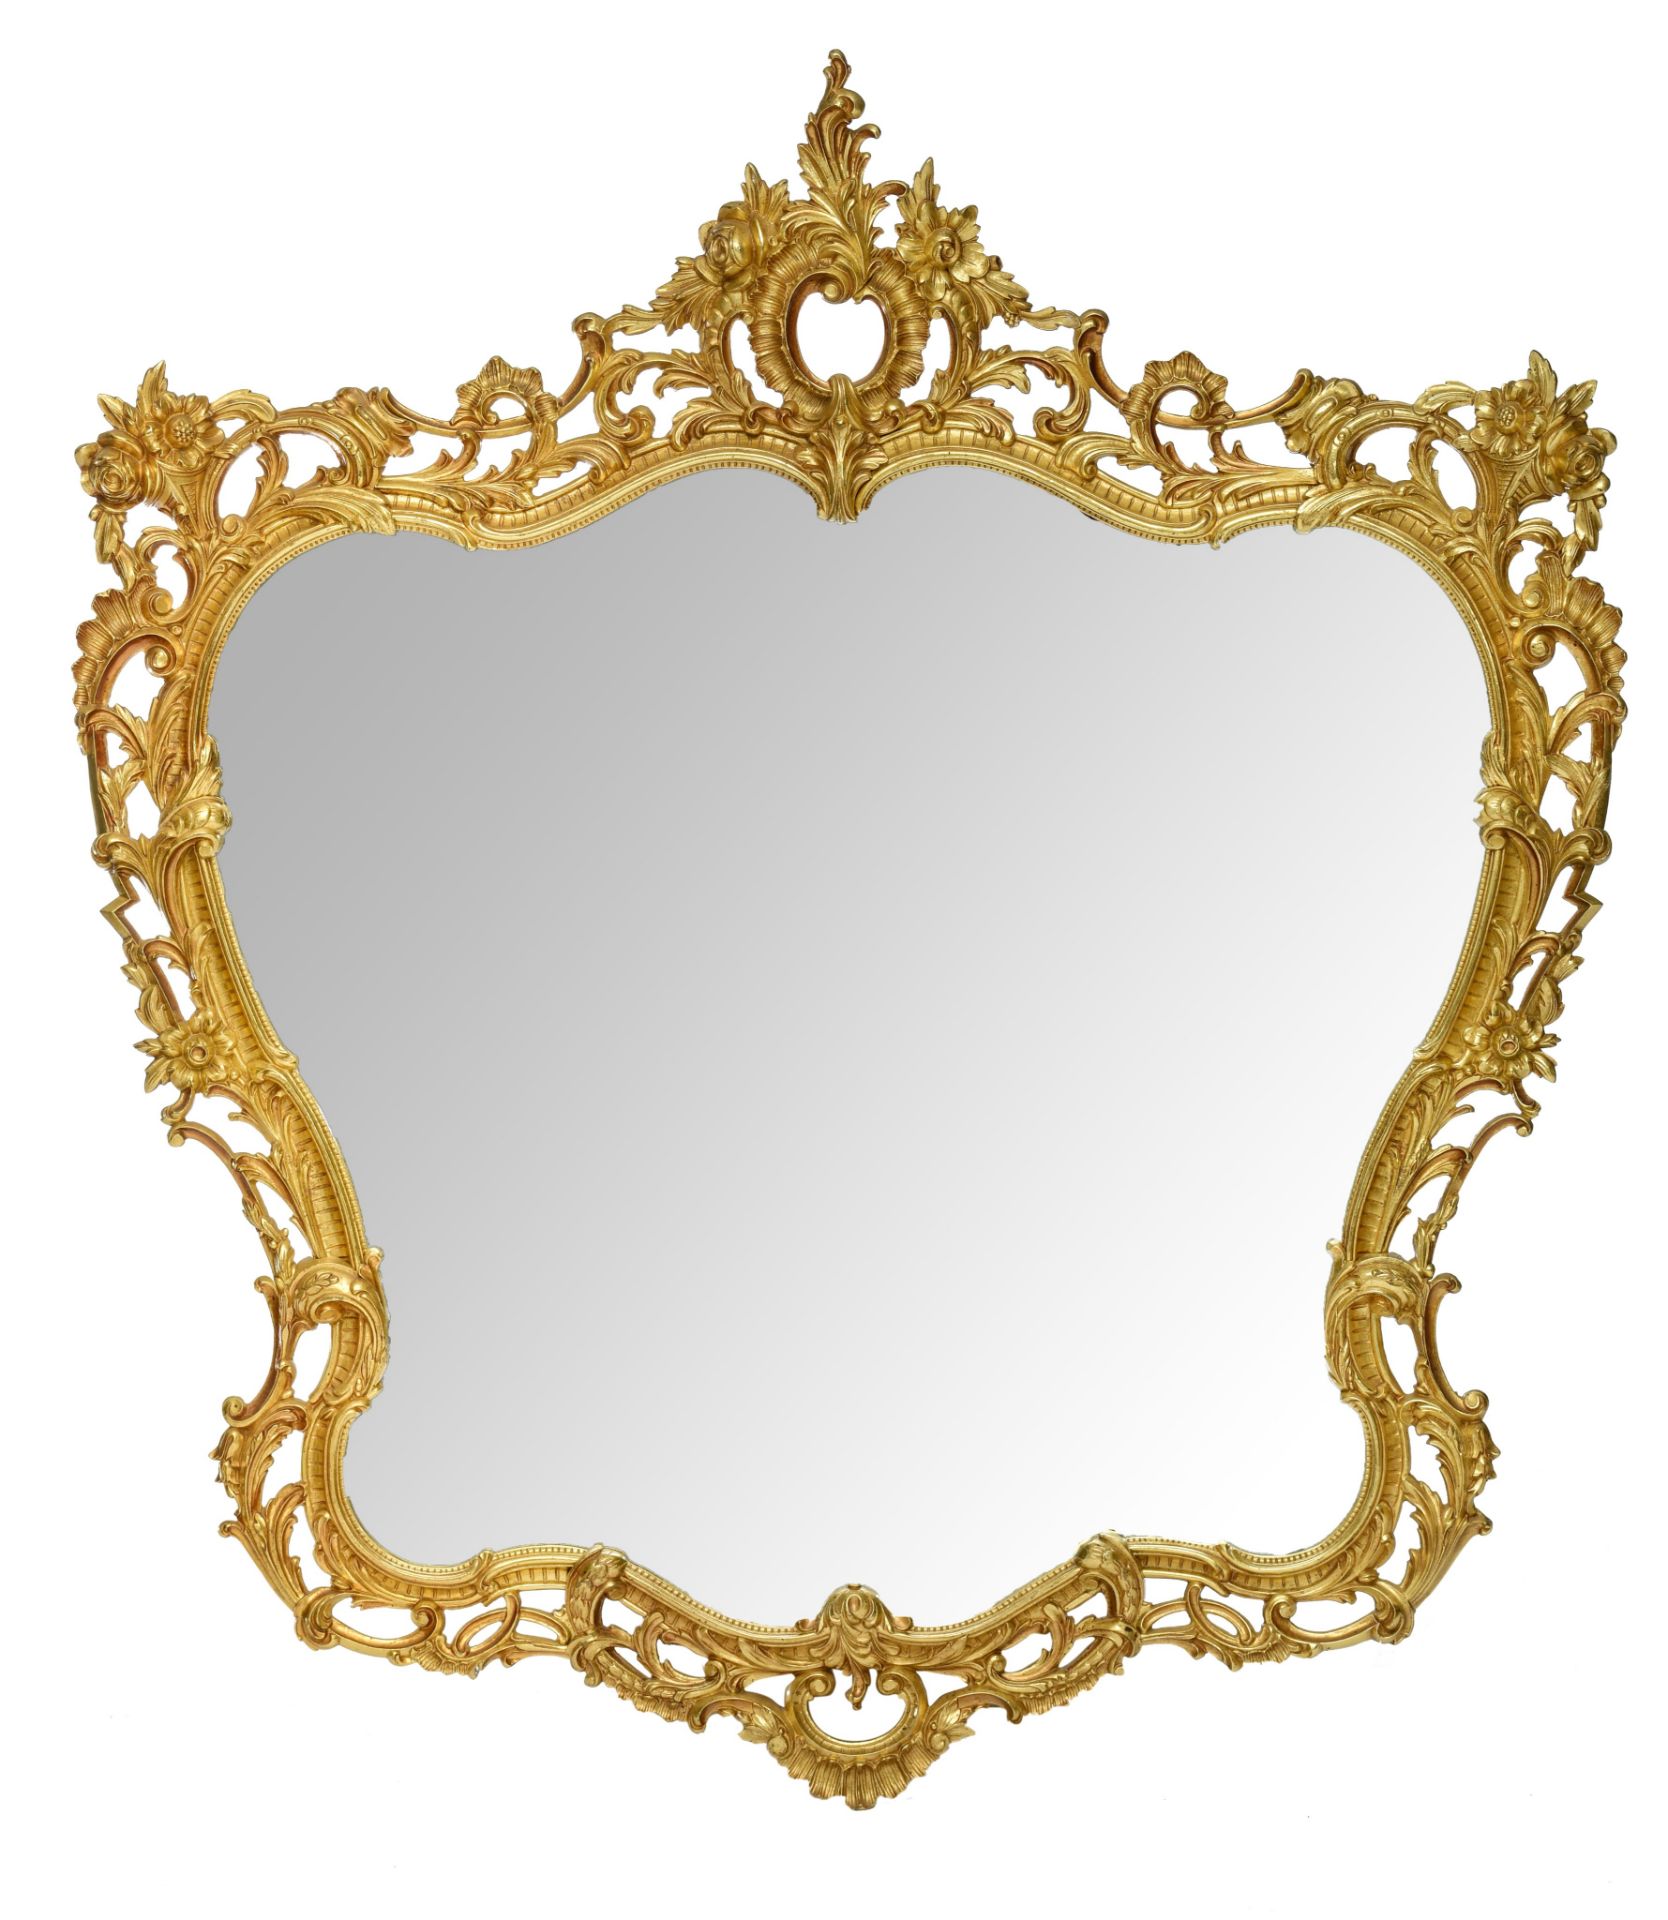 A large Rococo style gilt metal console table and mirror, H 125 - W 110 cm (the mirror) - H 85 - W 1 - Image 9 of 12